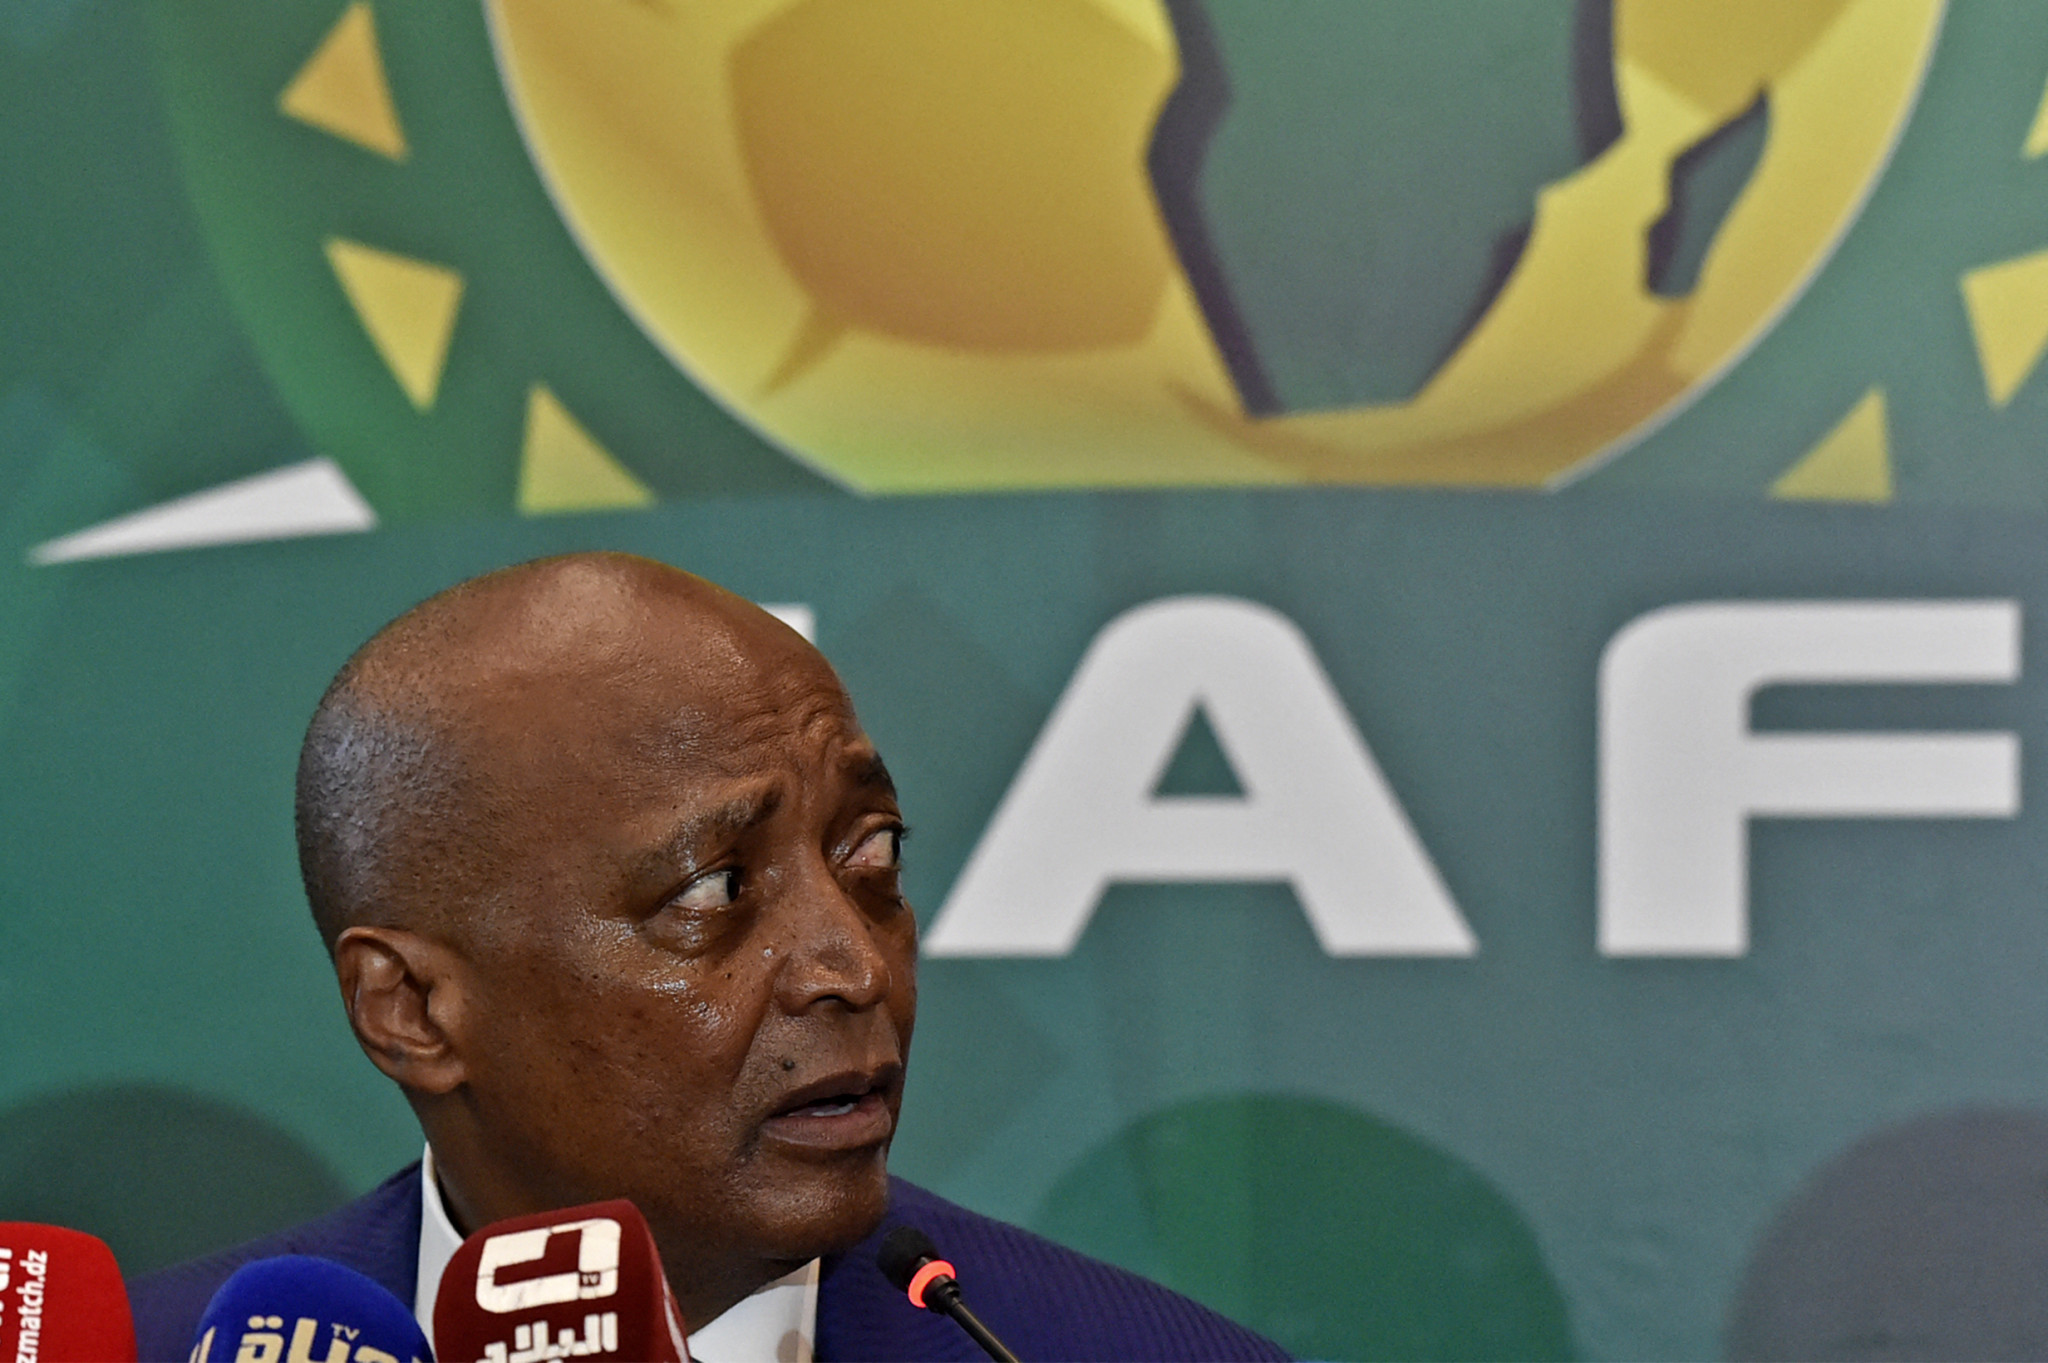 CAF President Patrice Motsepe insisted "no nation will be treated differently" after the dispute between Algeria and Morocco overshadowed the African Nations Championship ©Getty Images